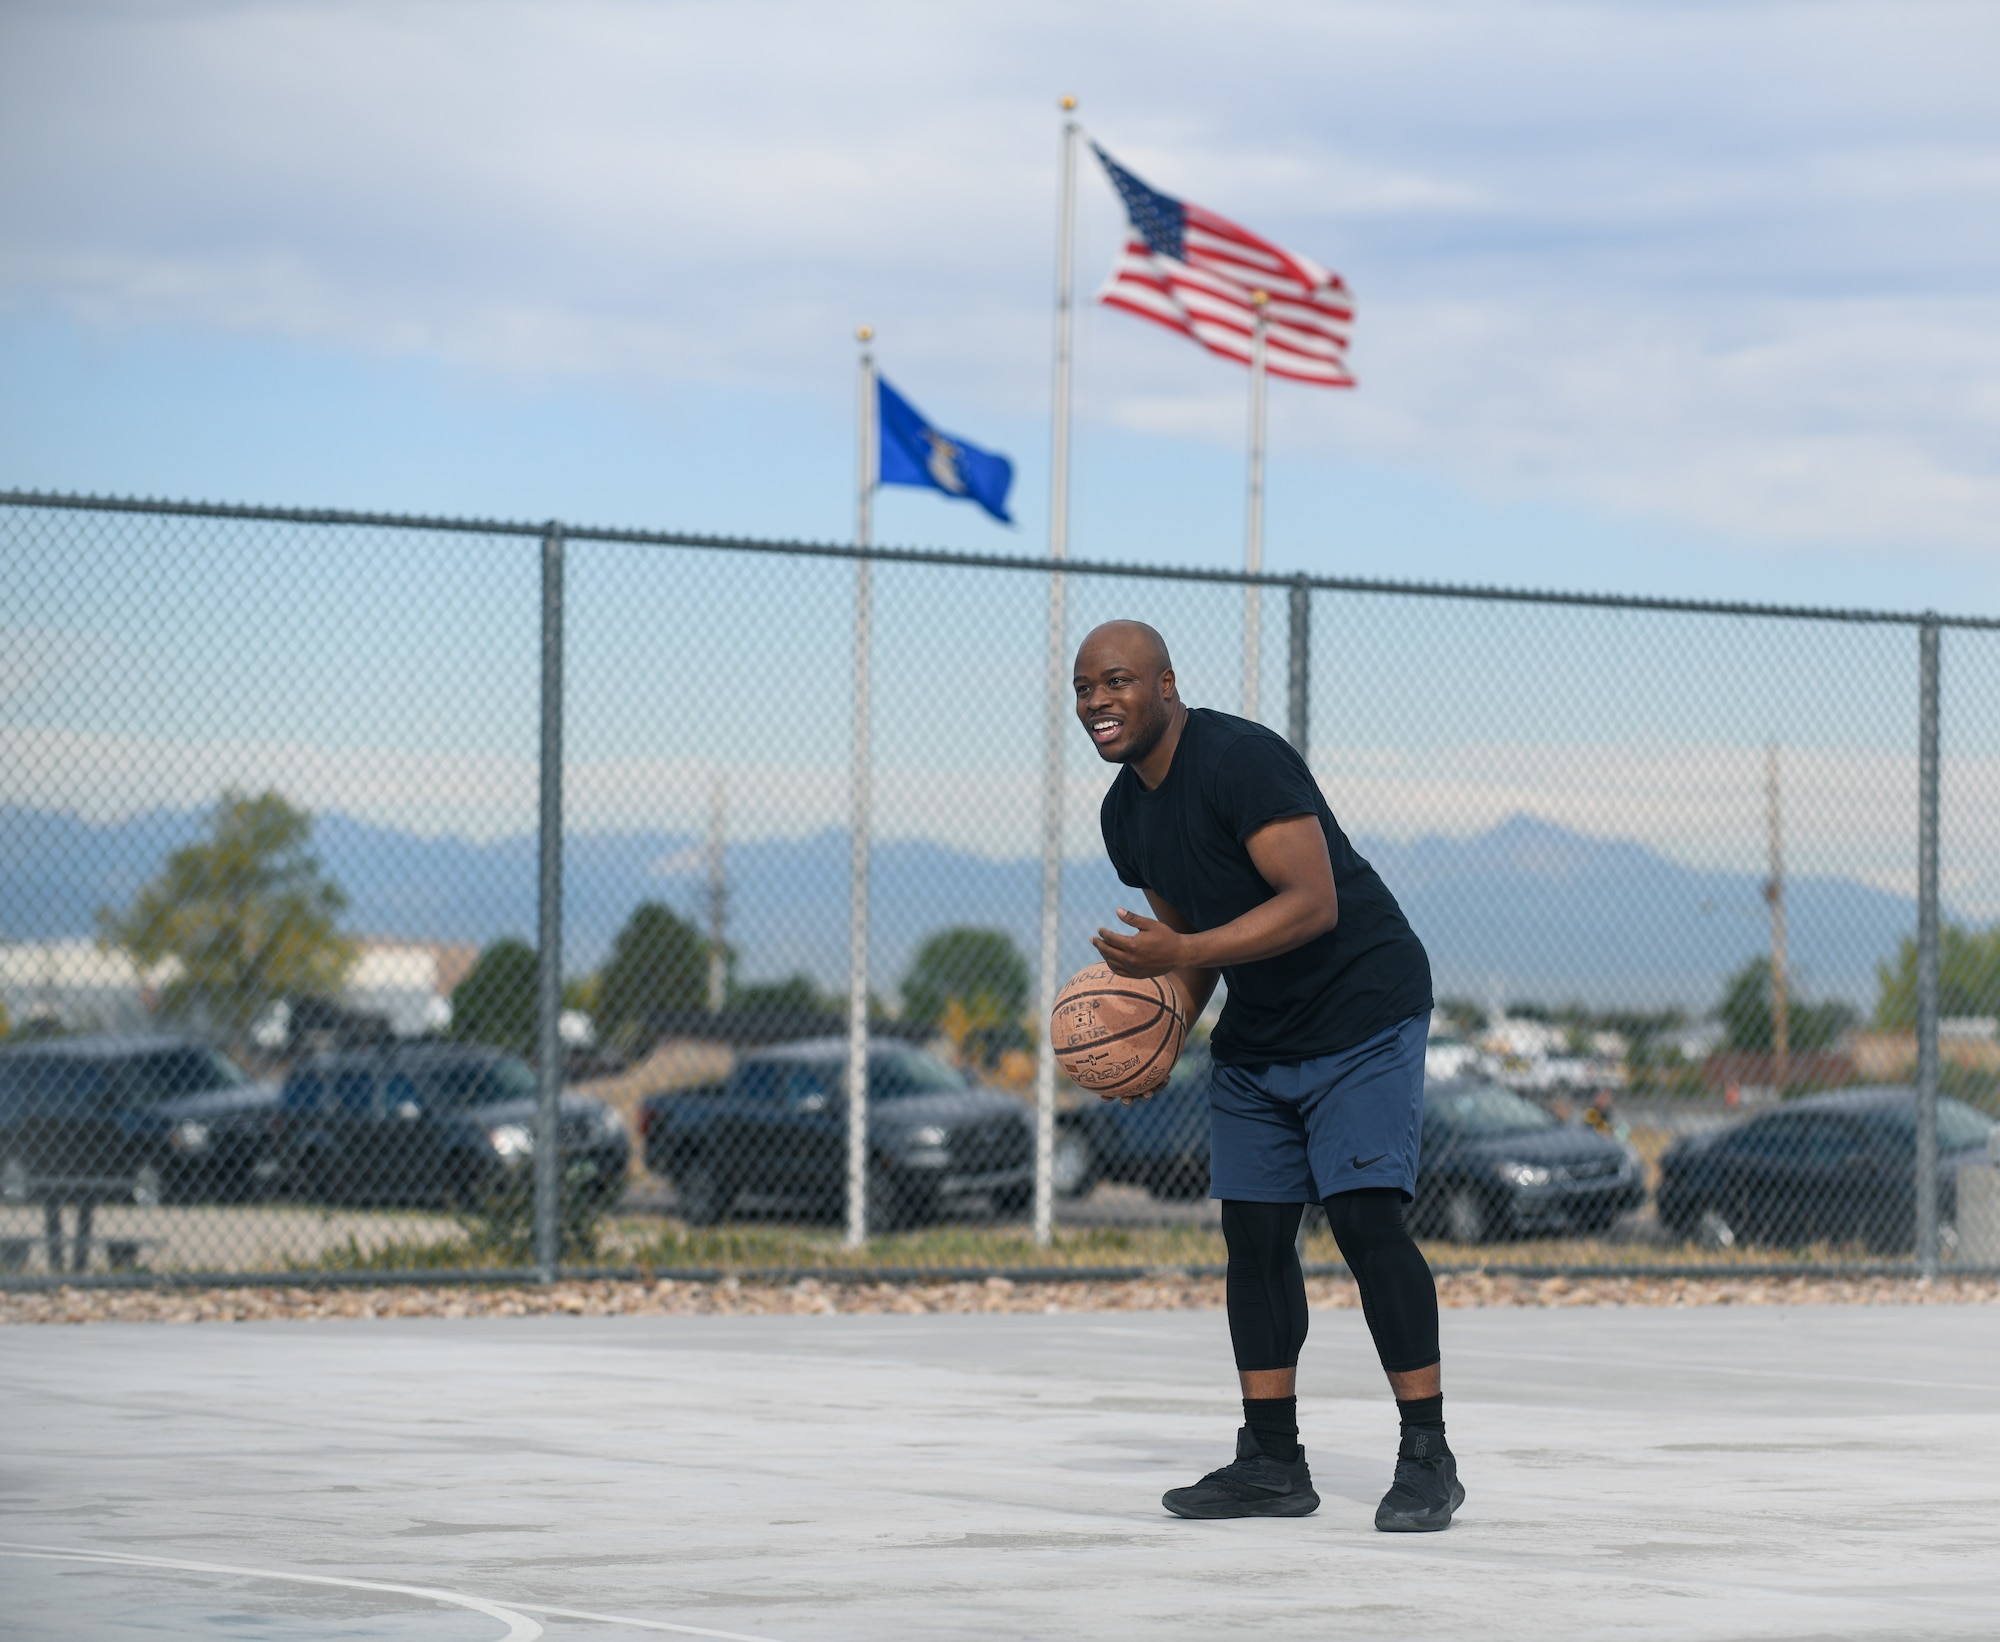 Senior Airman Nicholas Touriac Jr., a 460th Civil Engineer Squadron electrical power production technician, prepares to shoot a basketball at Panther Dorm basketball court on Buckley Air Force Base, Colo.